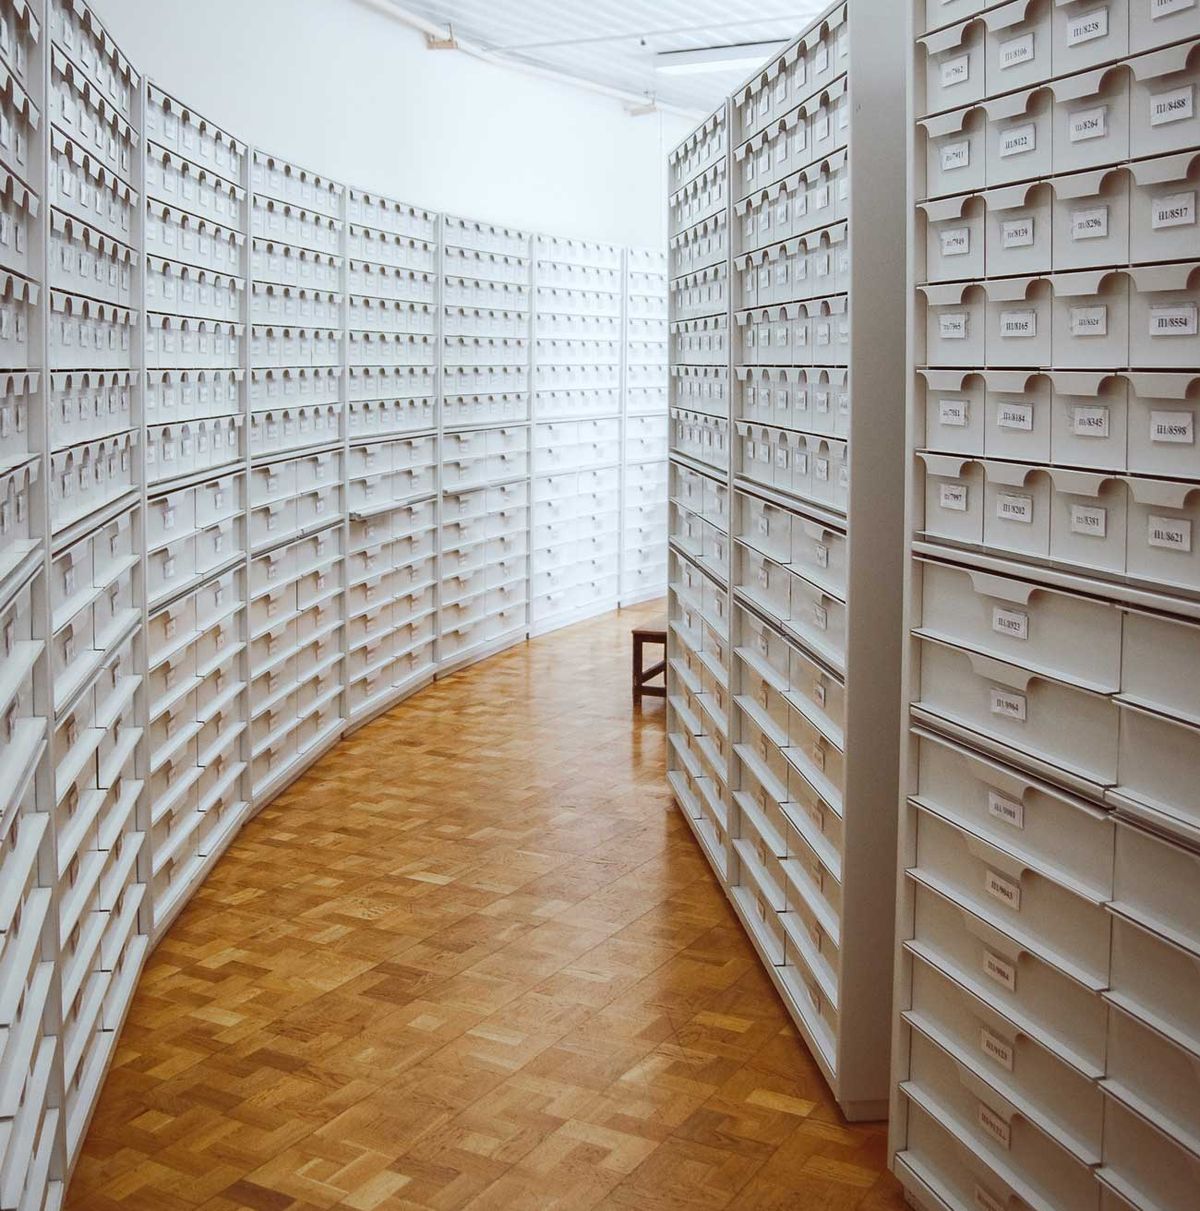 A conman tampered with records in the Tate Archives in order to produce false provenances for fake pictures Ula Kuźma